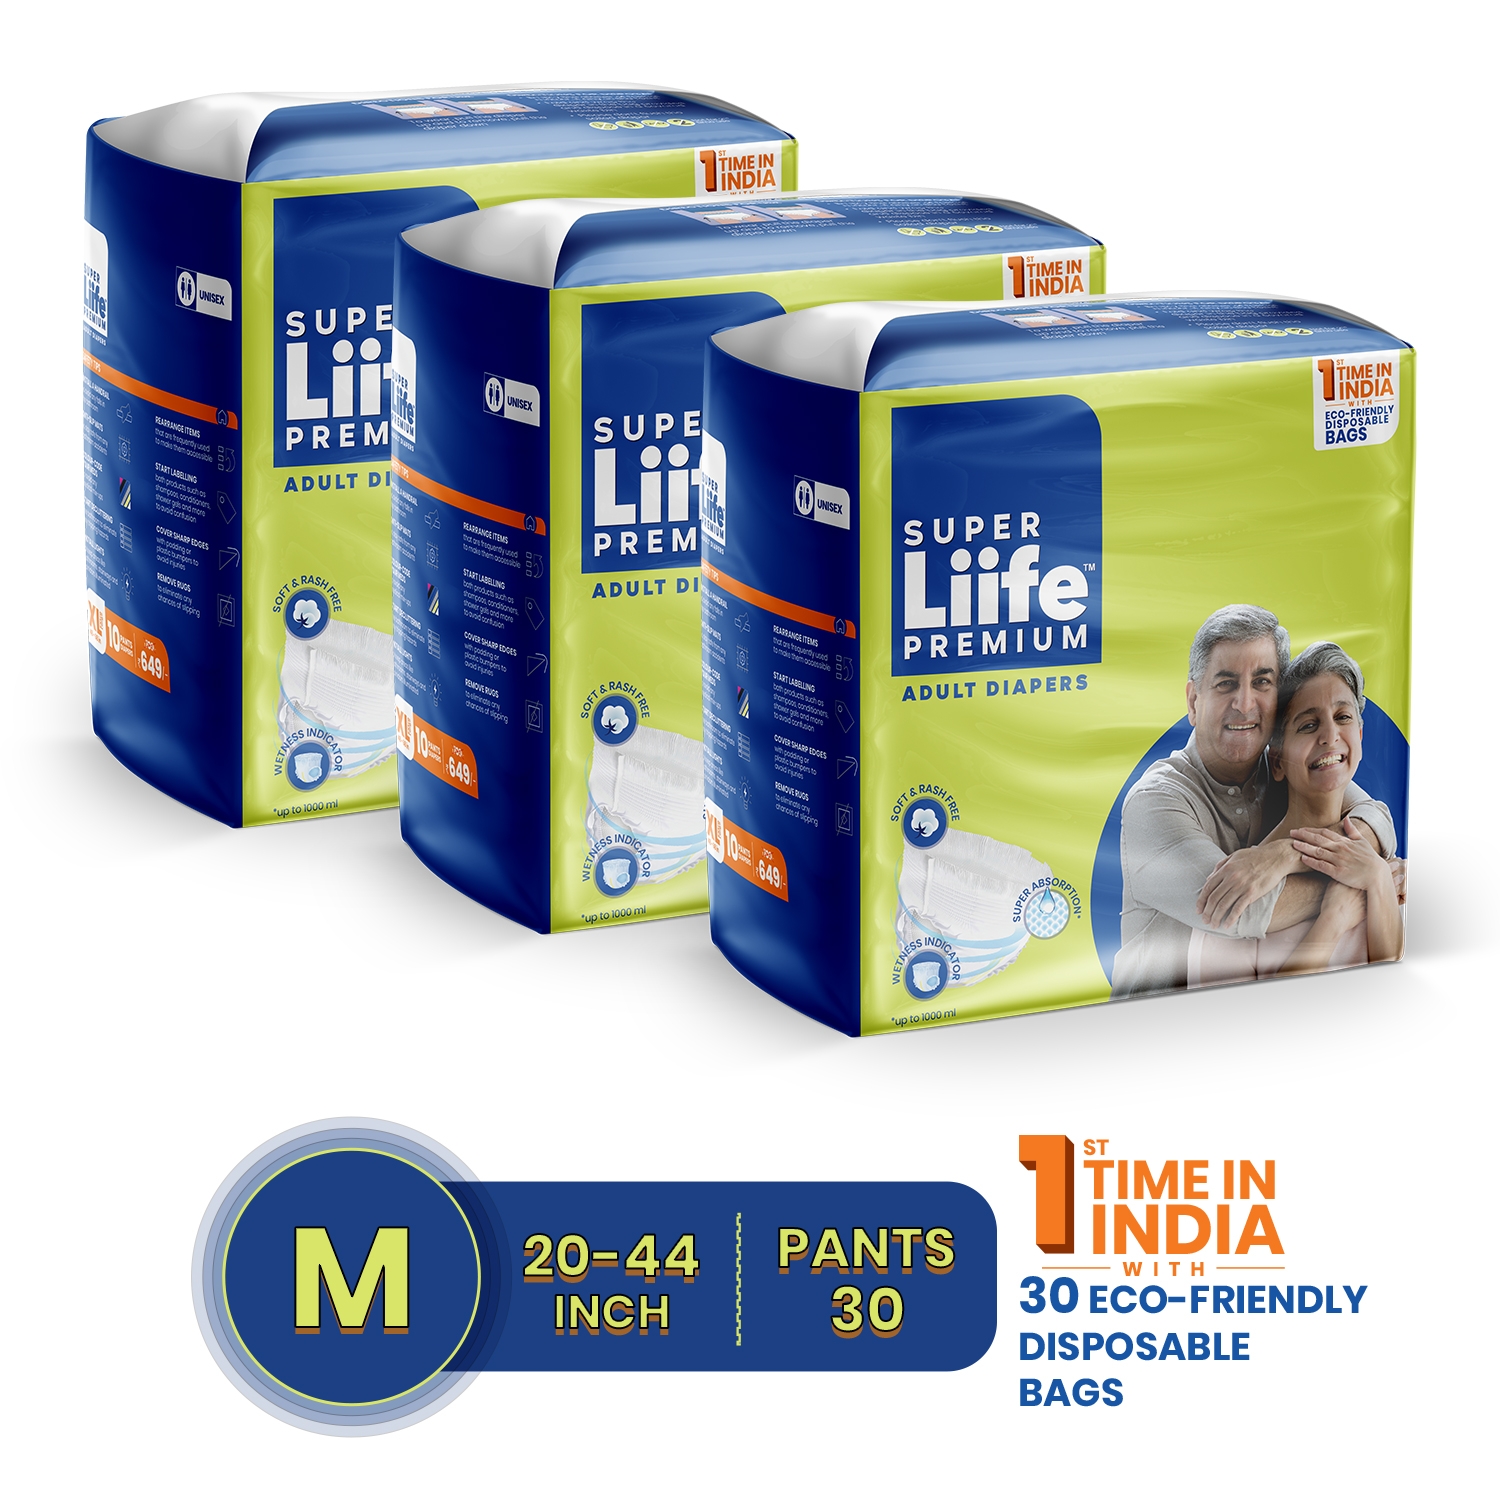 Super Liife | Super Liife Rash Free Adult Diapers Pants with Wetness Indicator and Disposable Bags - 30 Count (Medium)